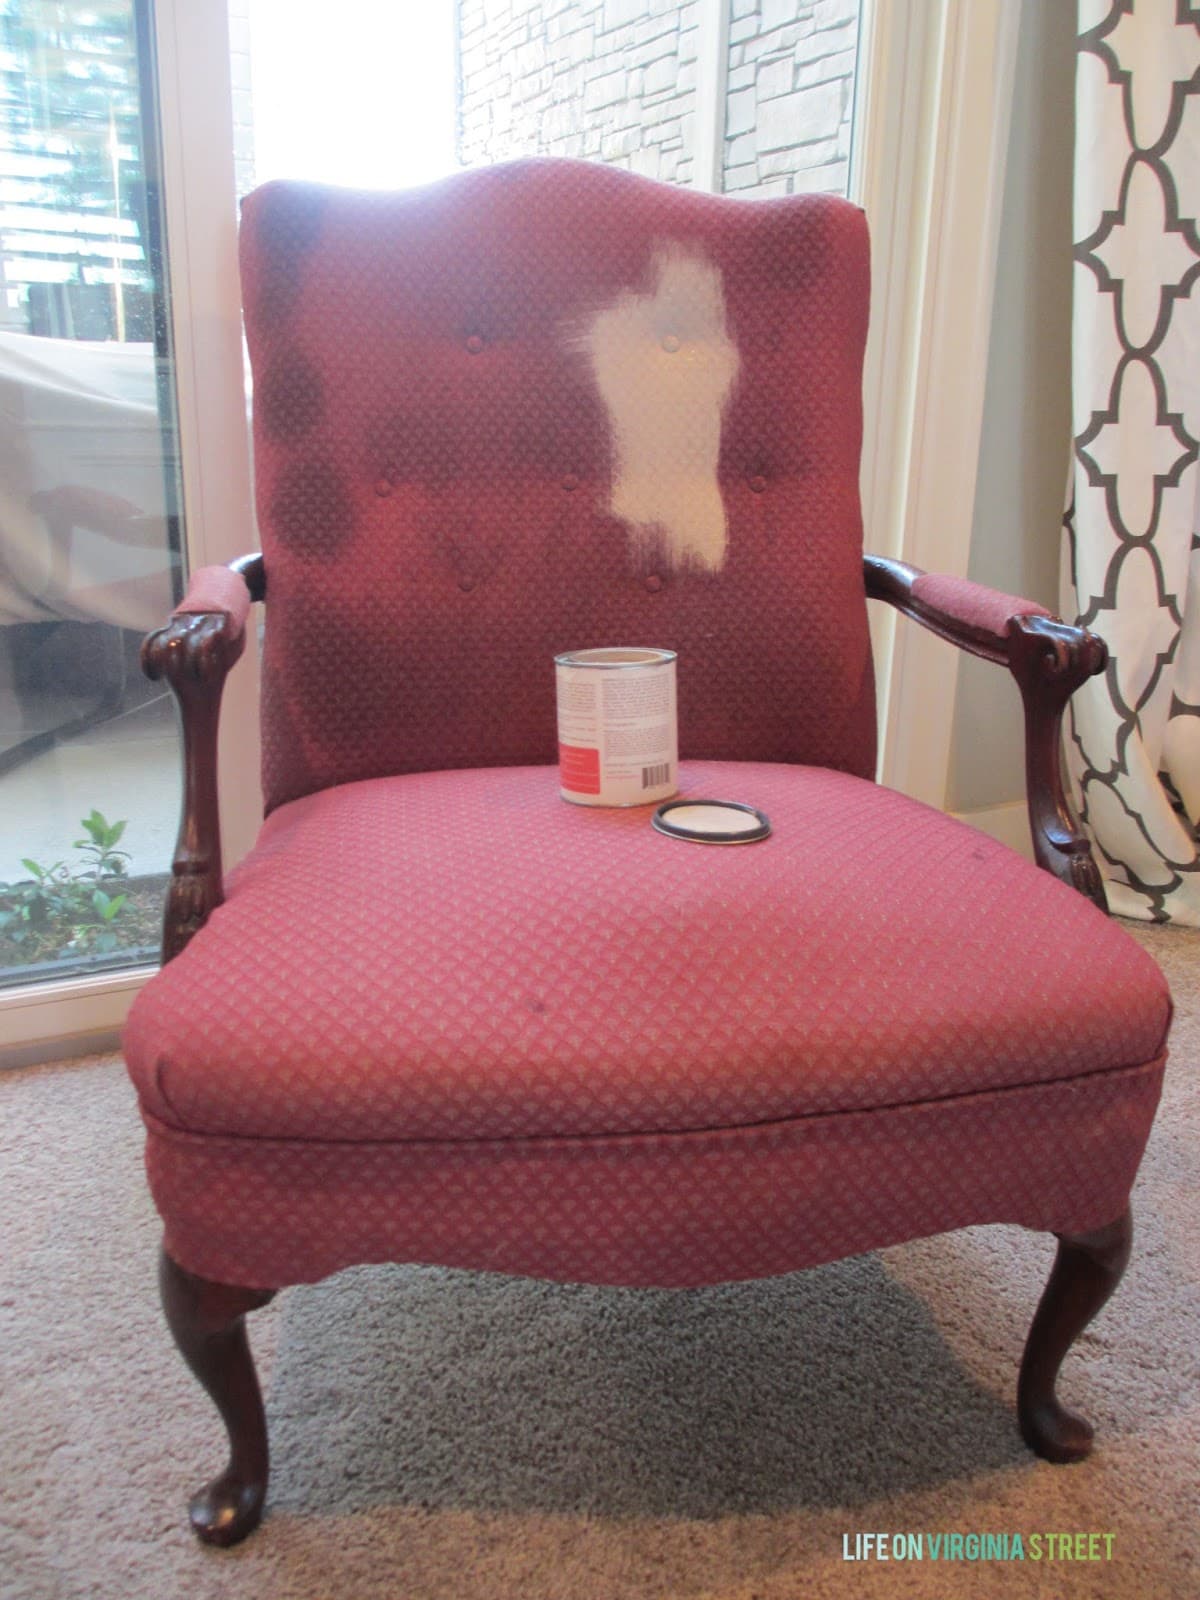 Painted Fabric and Wood Chair. I had no idea painted fabric could look this beautiful!